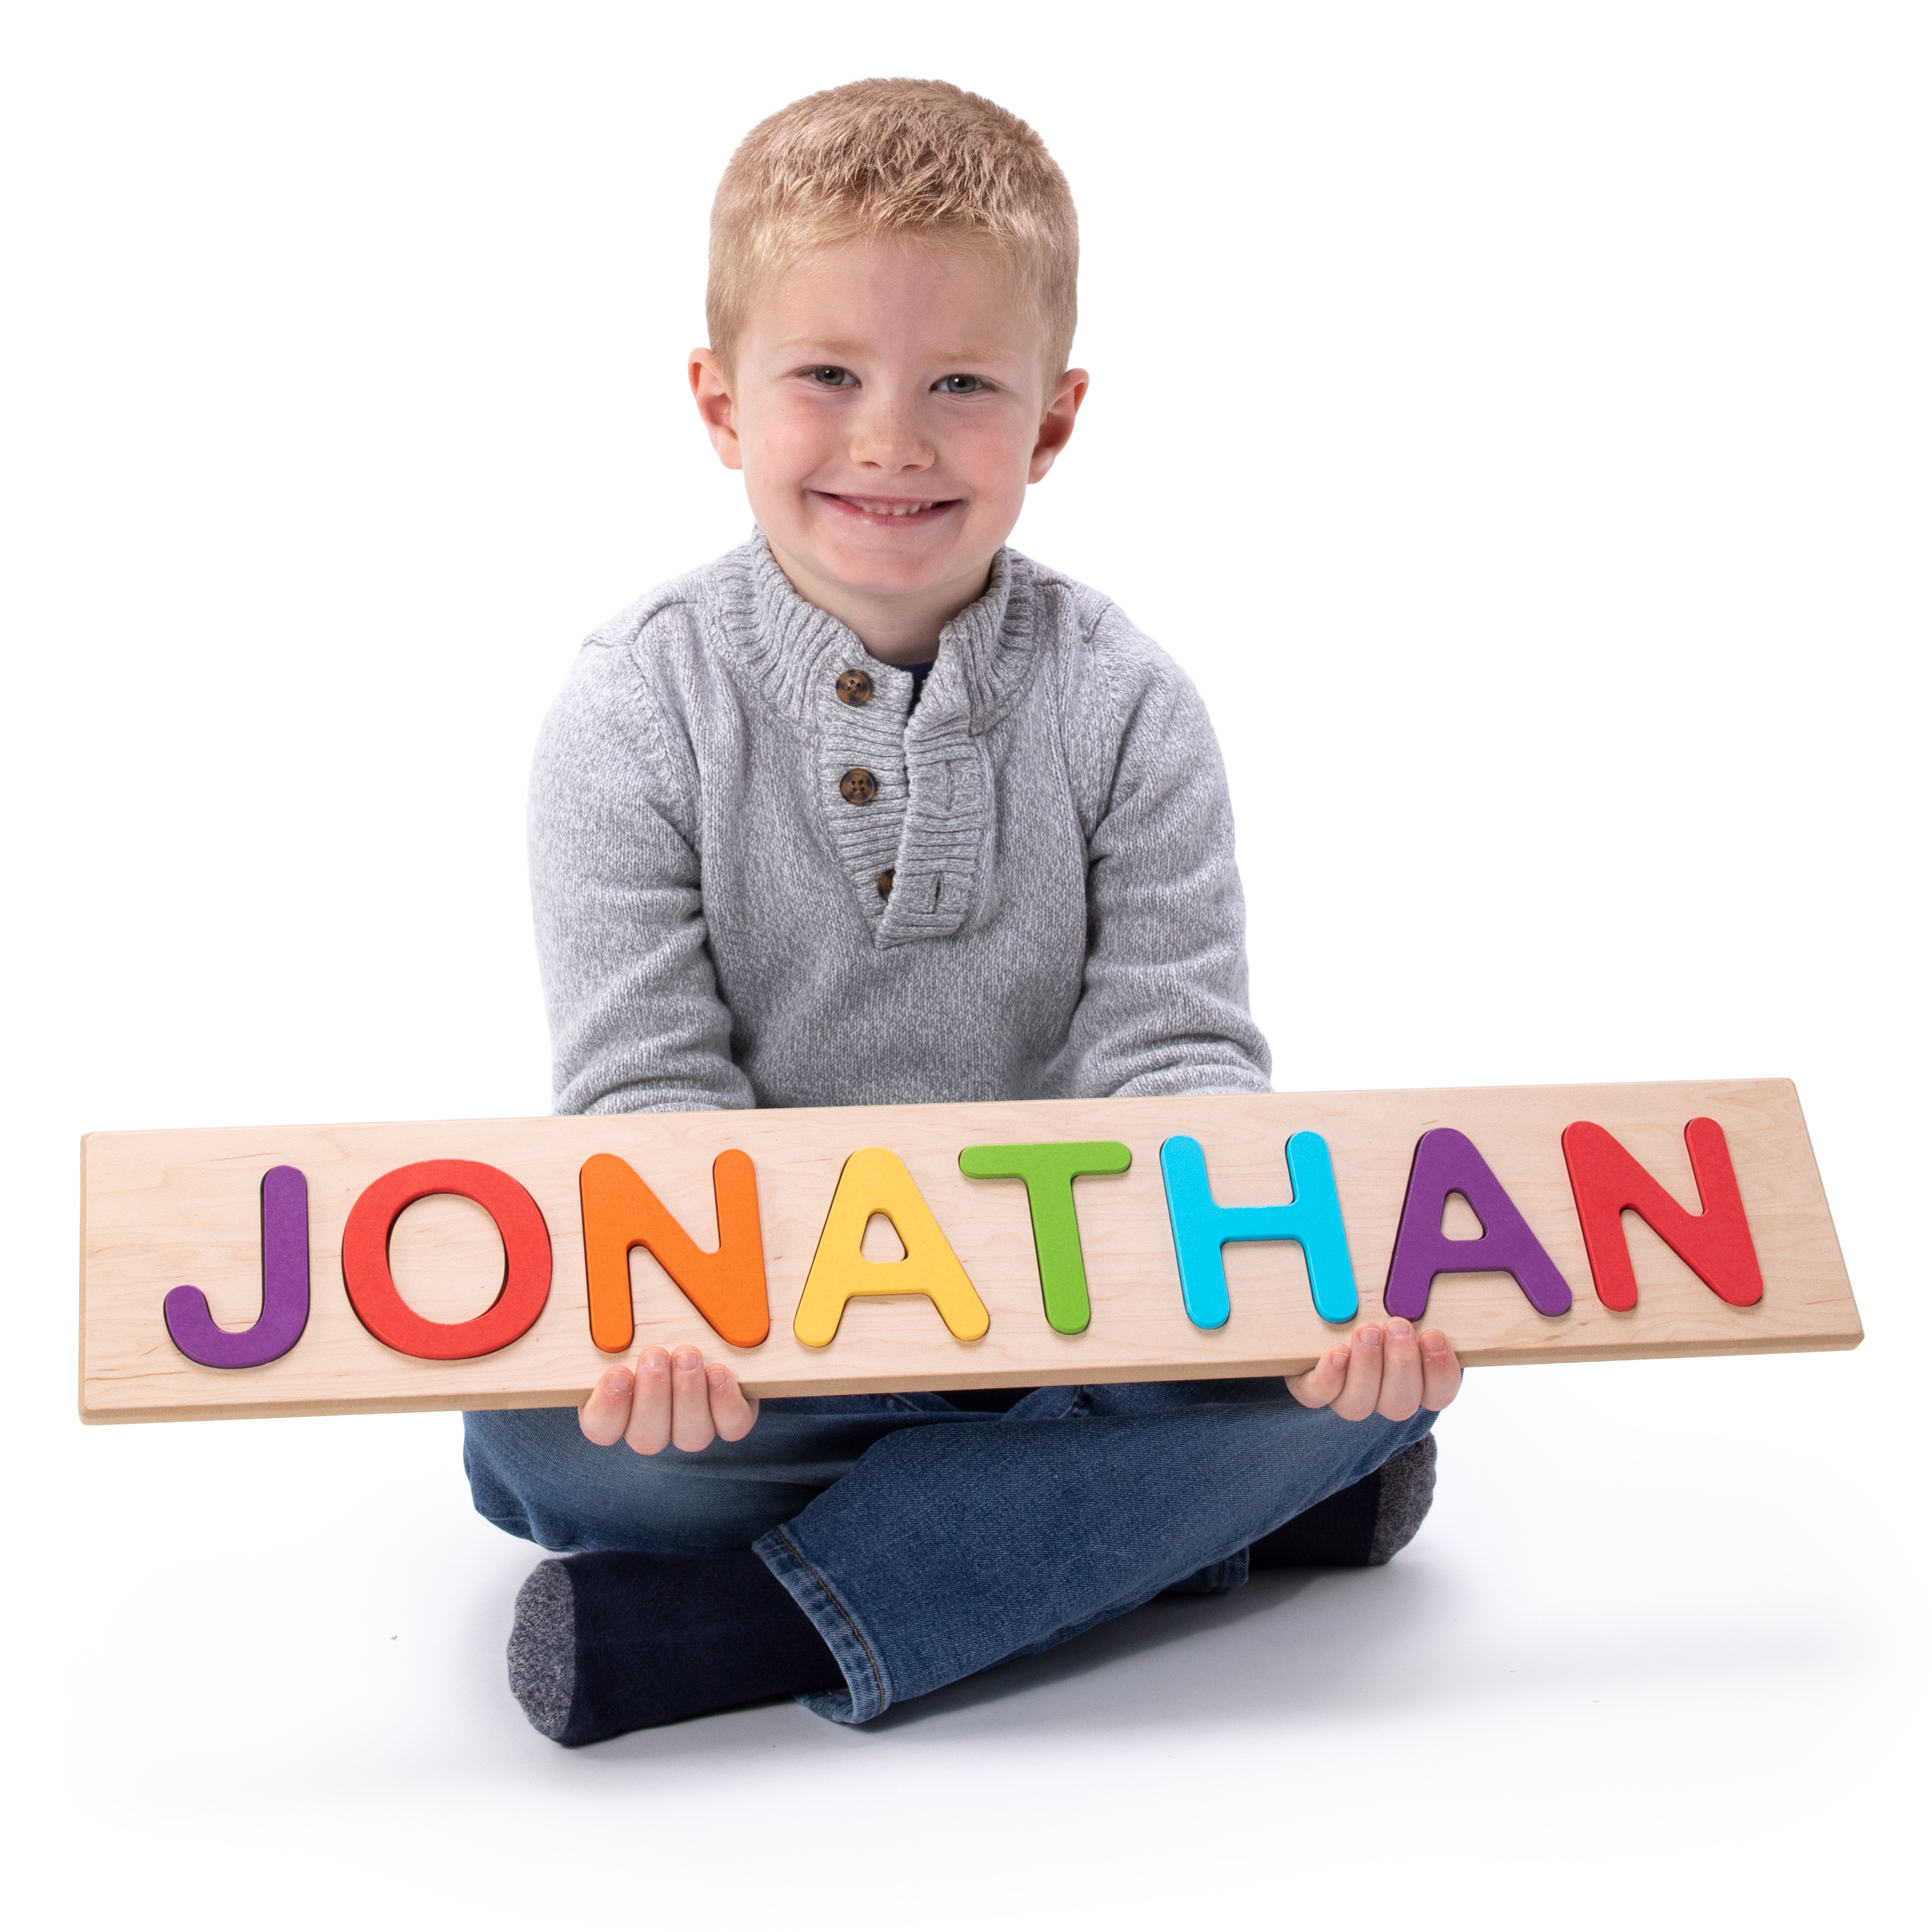 Children's Room Decoration Personalised wooden name train set Buy 3 Get 1 Free